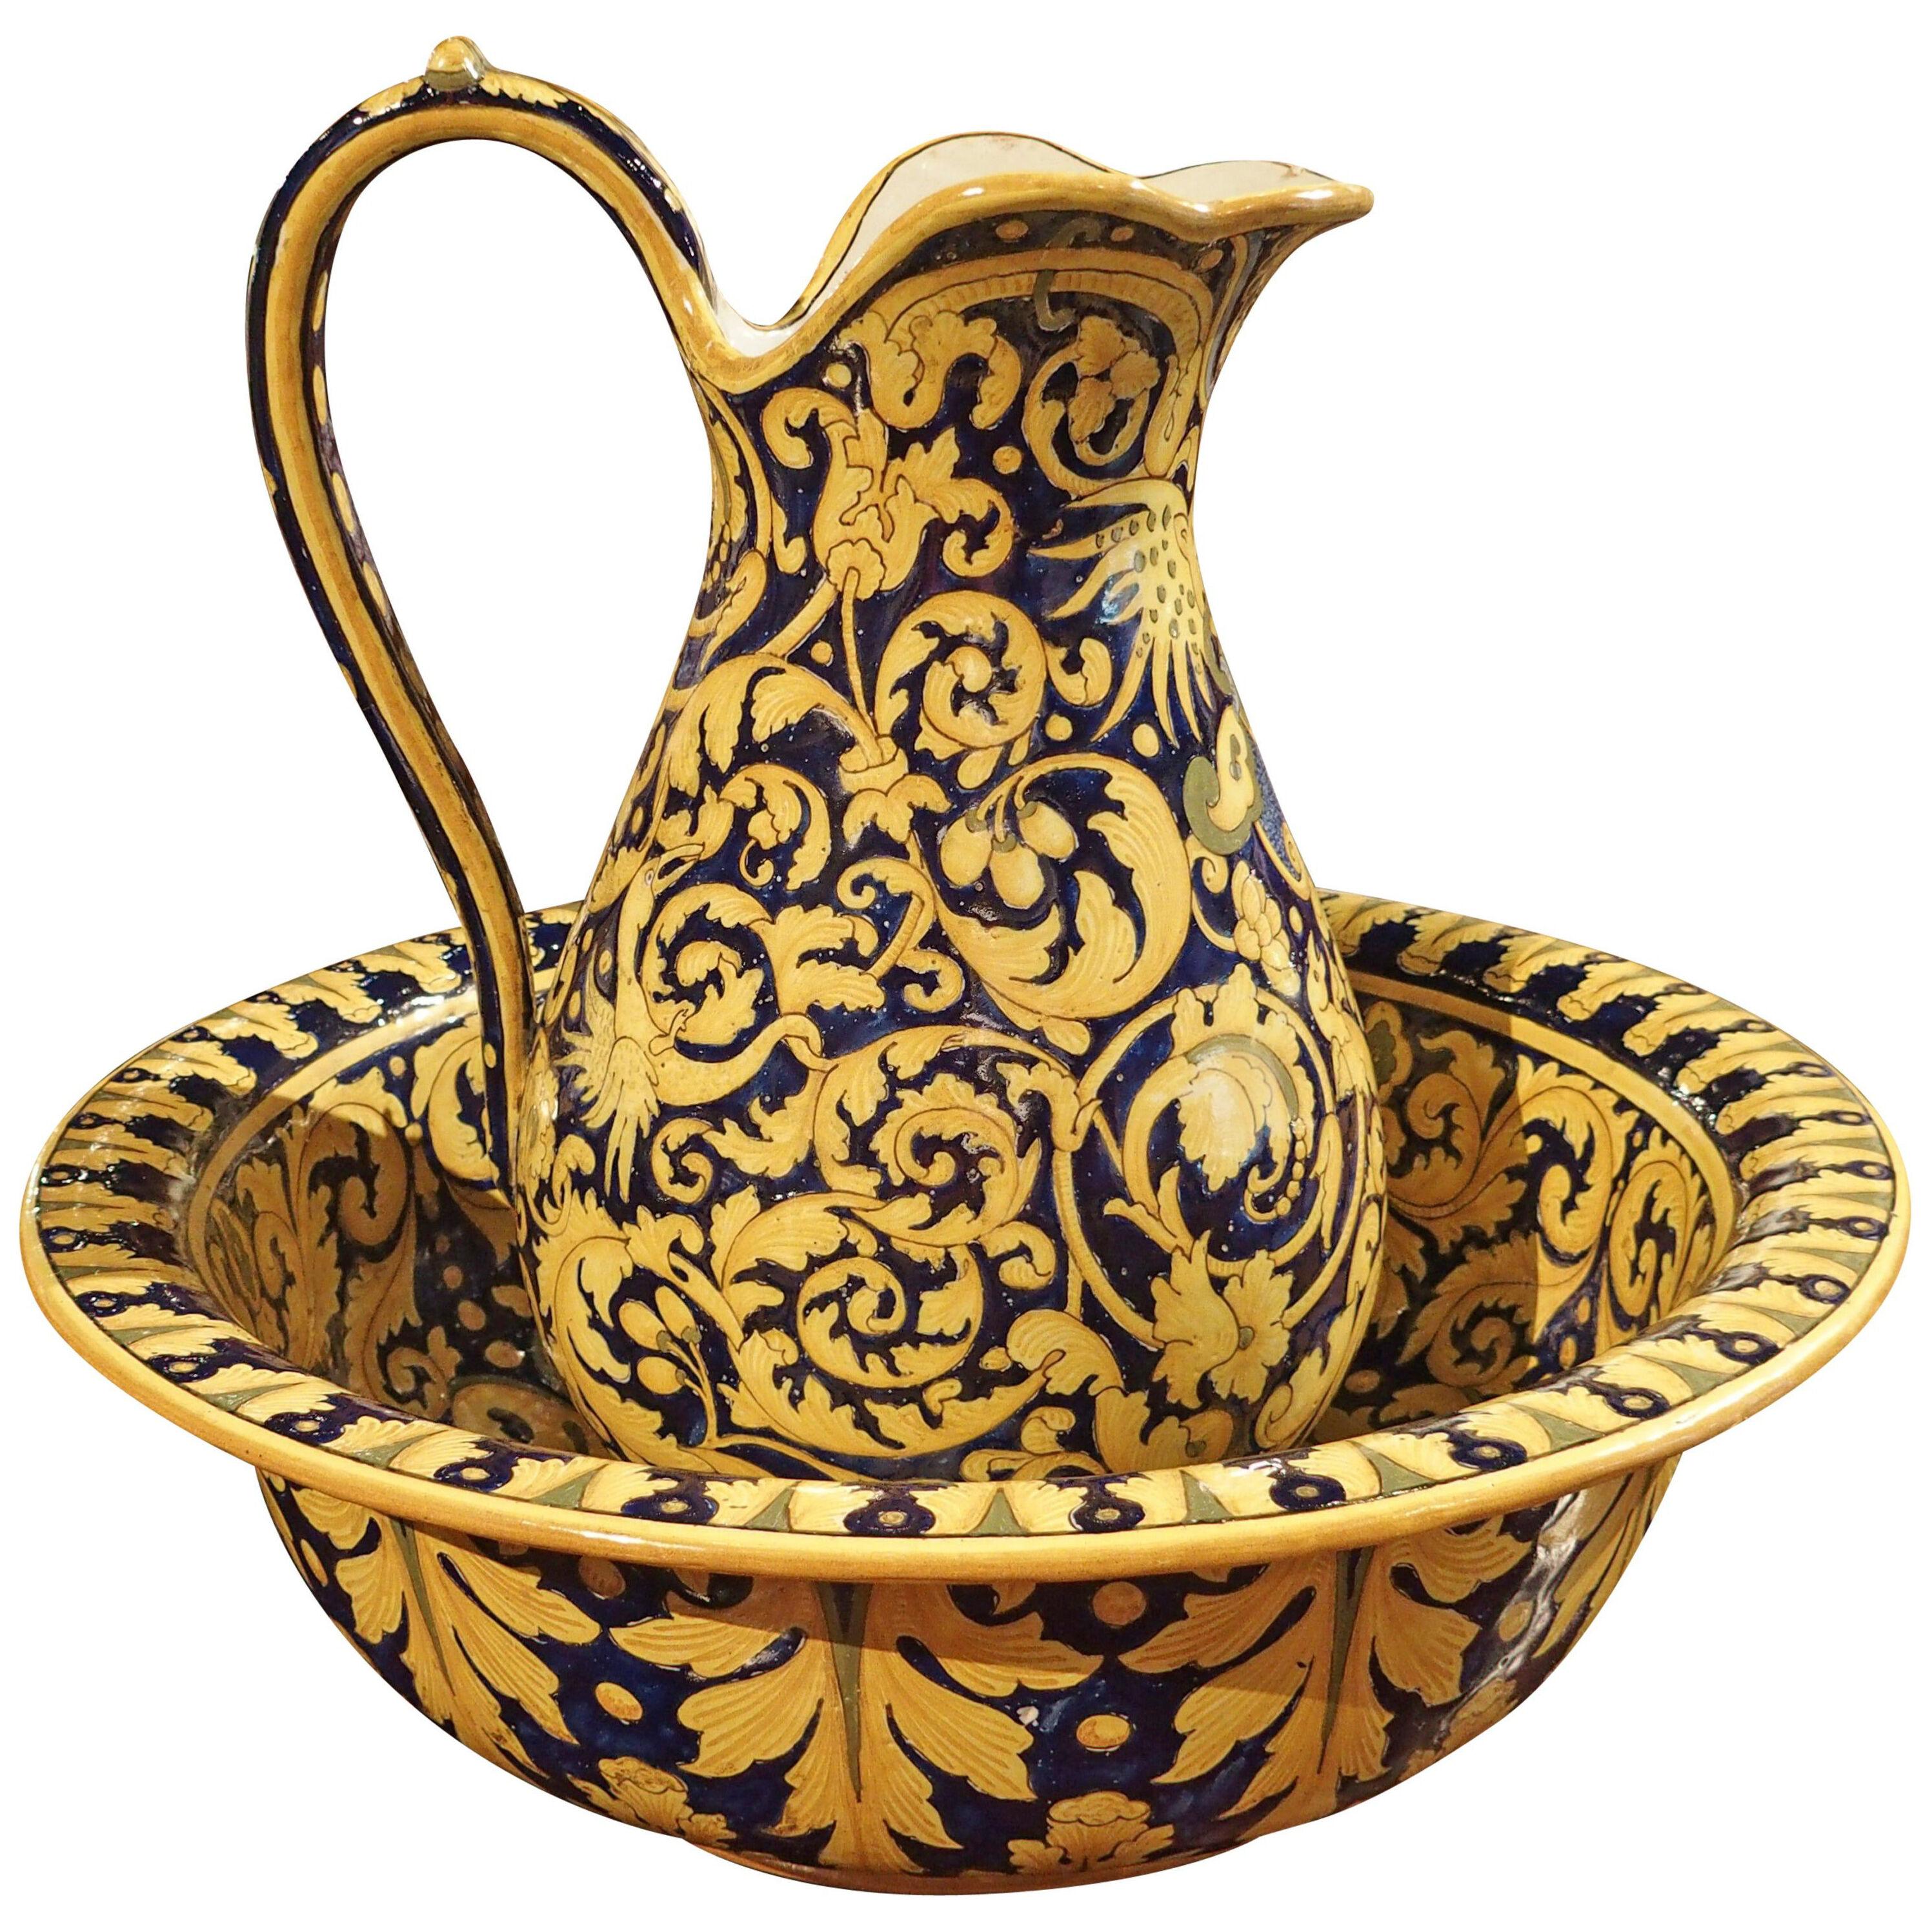 Antique Nevers Pitcher and Bowl from France, circa 1885